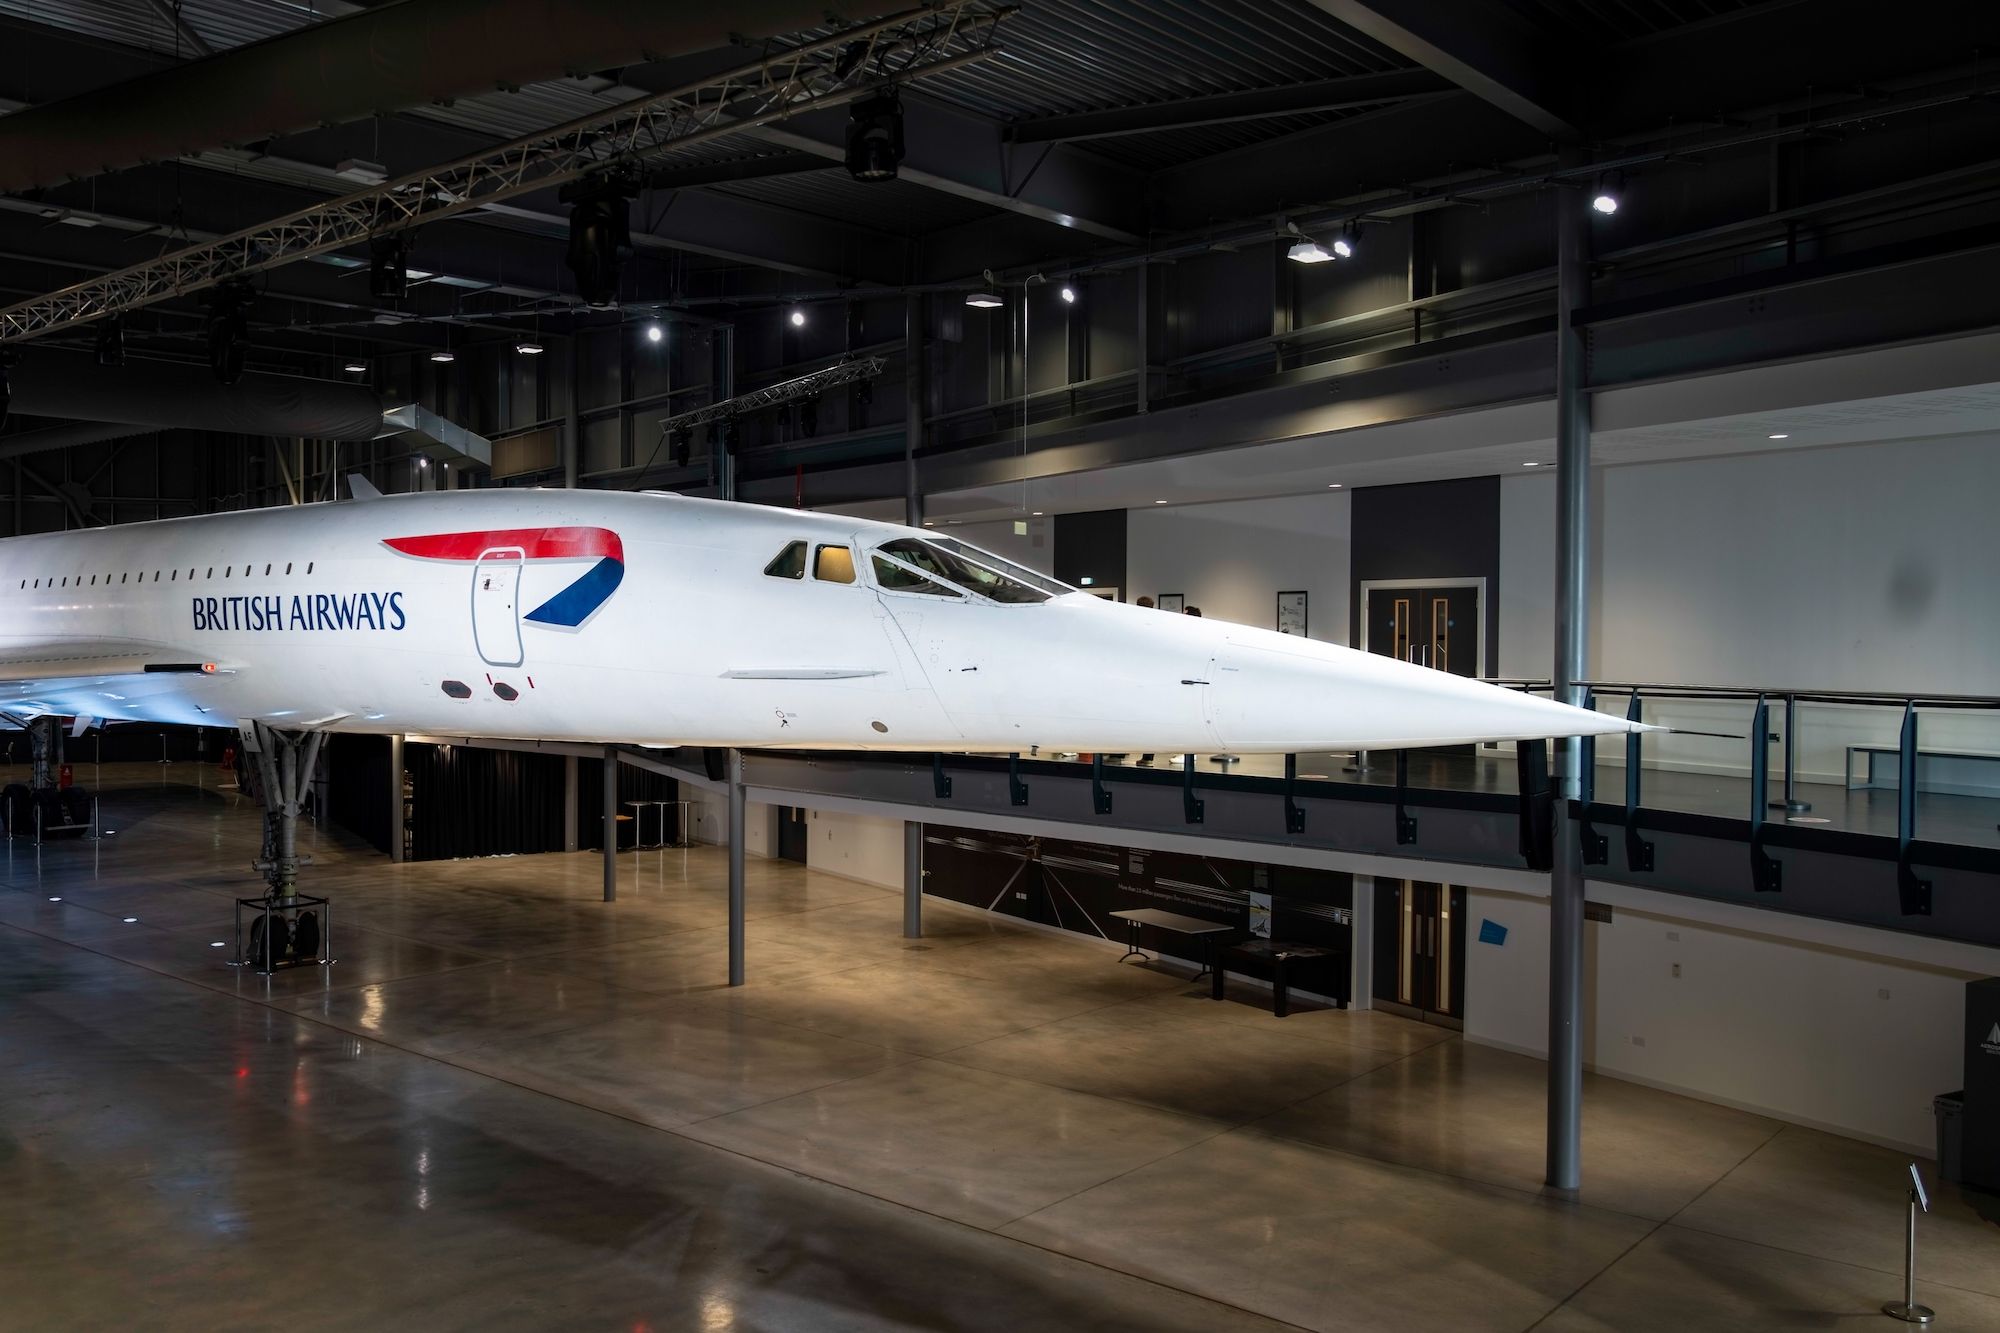 A Concorde airframe sitting in a museum.